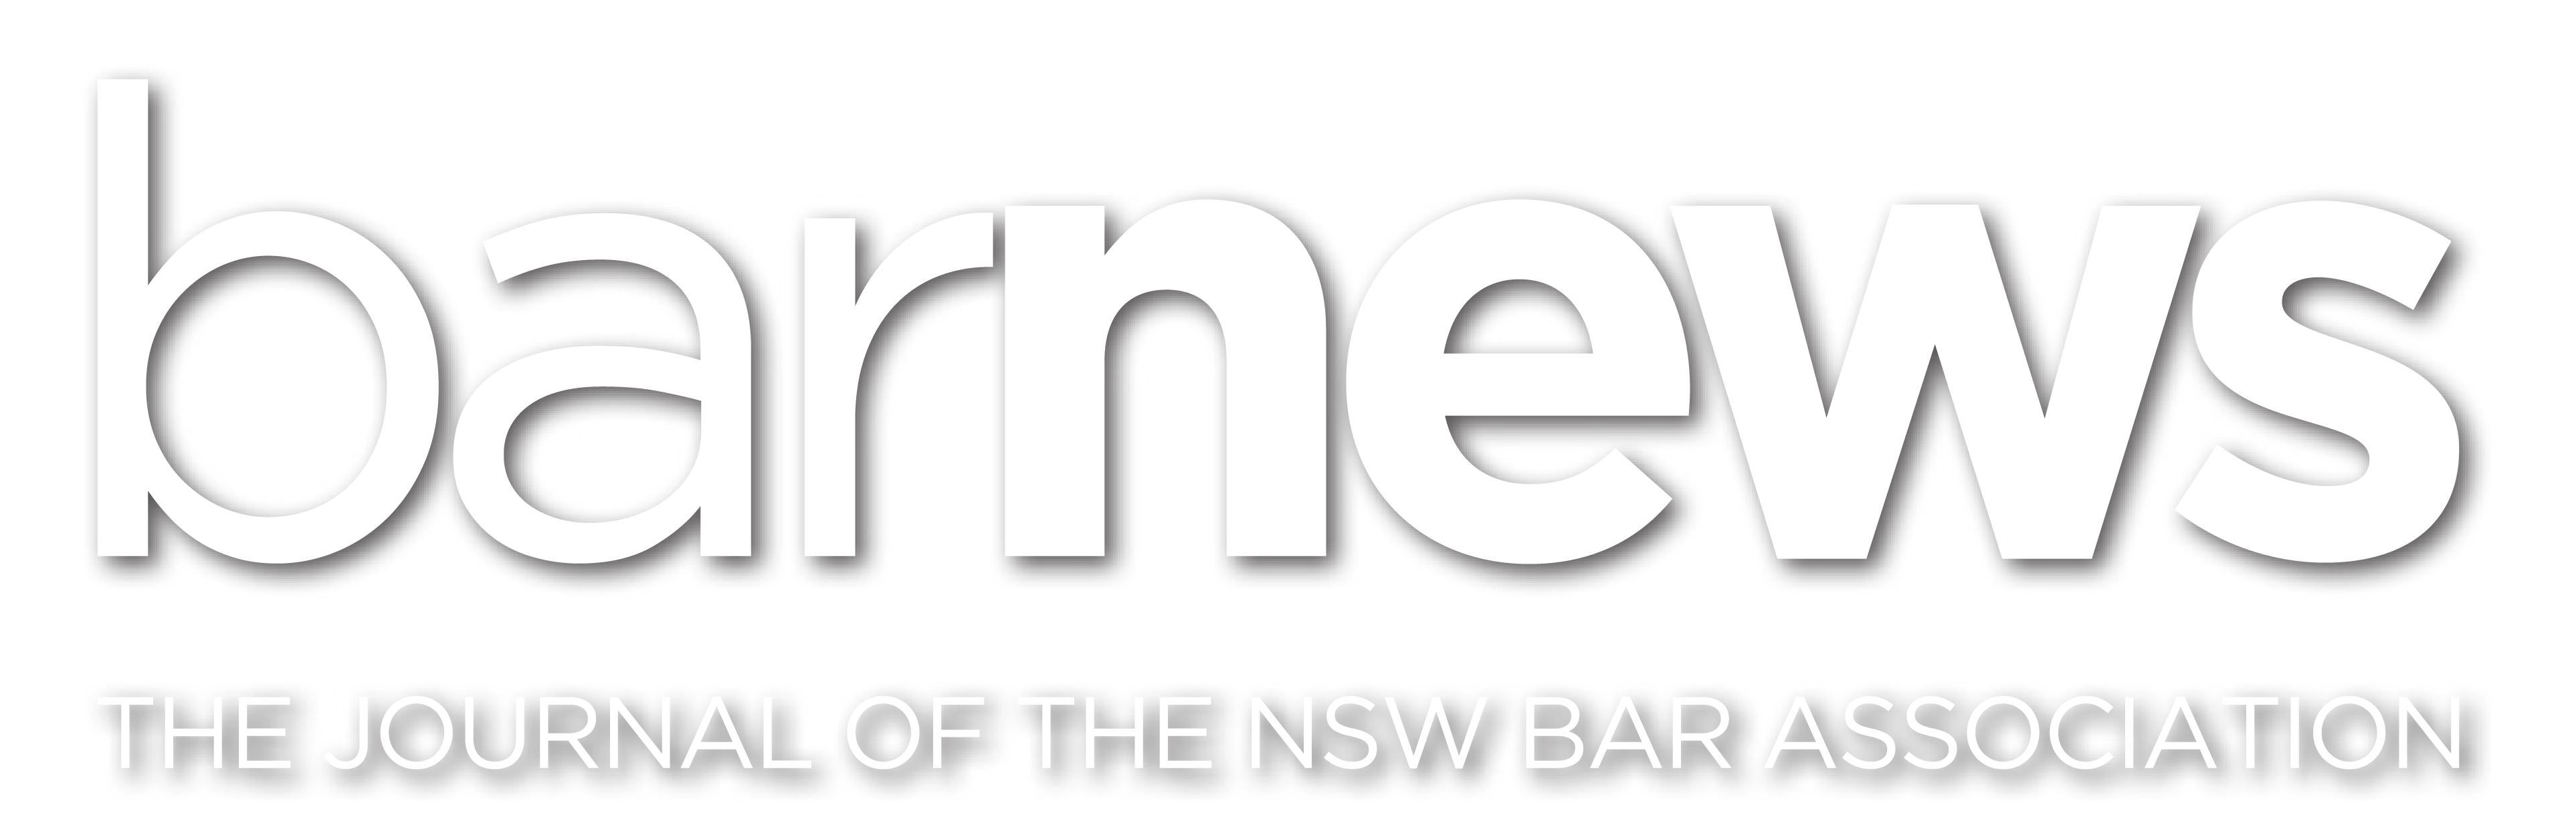 Logo of the Bar News the journal of the NSW Bar Association